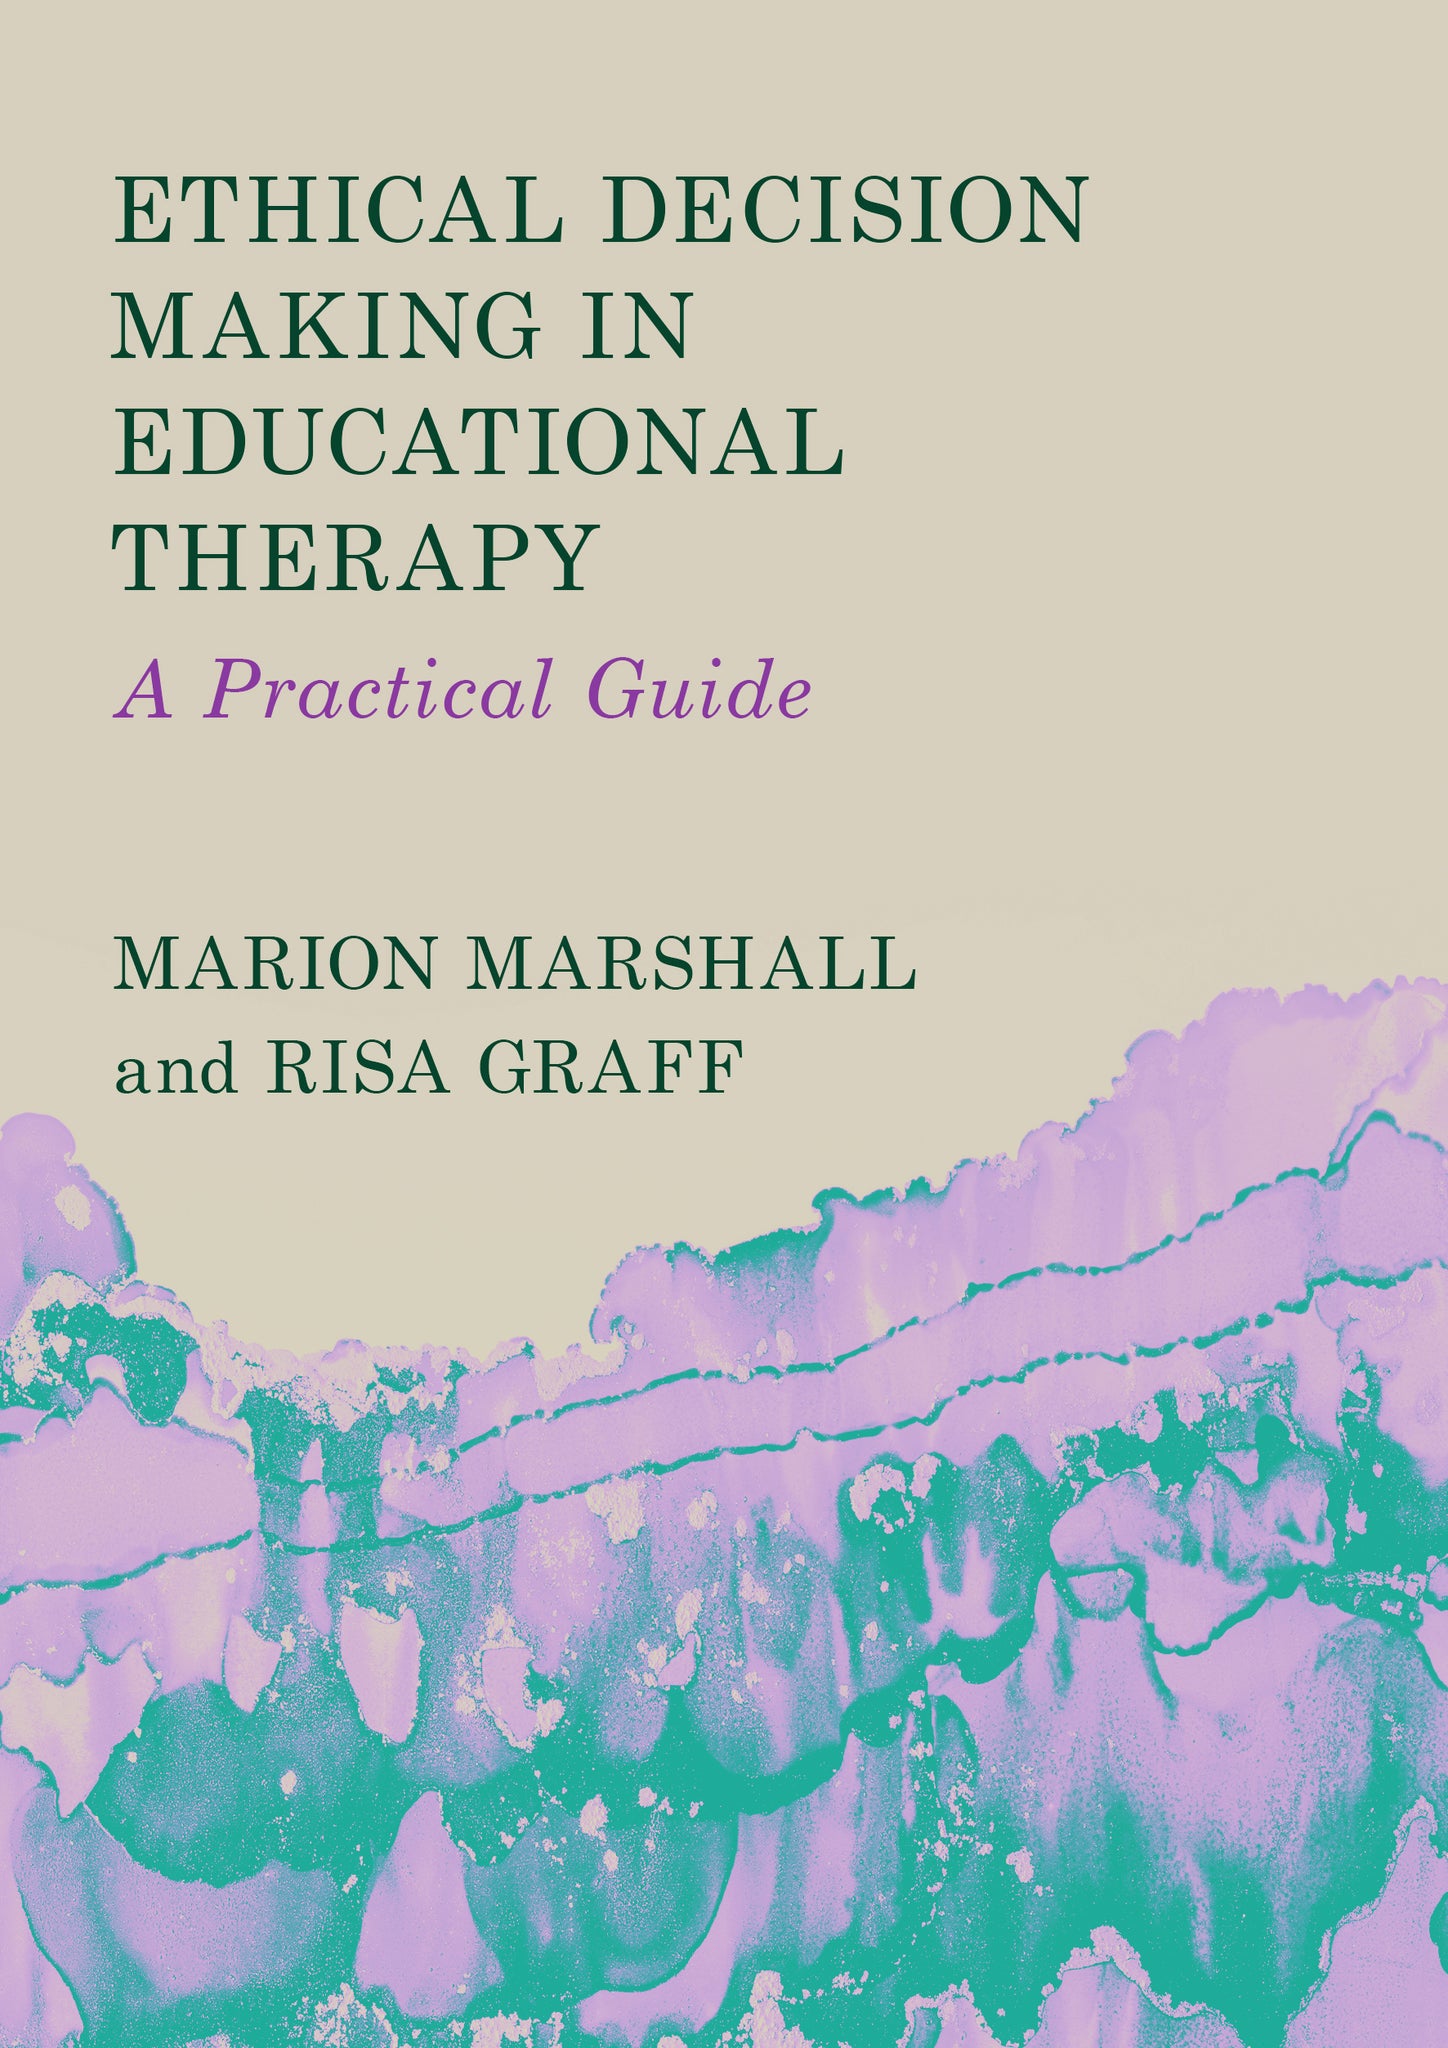 Ethical Decision Making in Educational Therapy: A Practical Guide